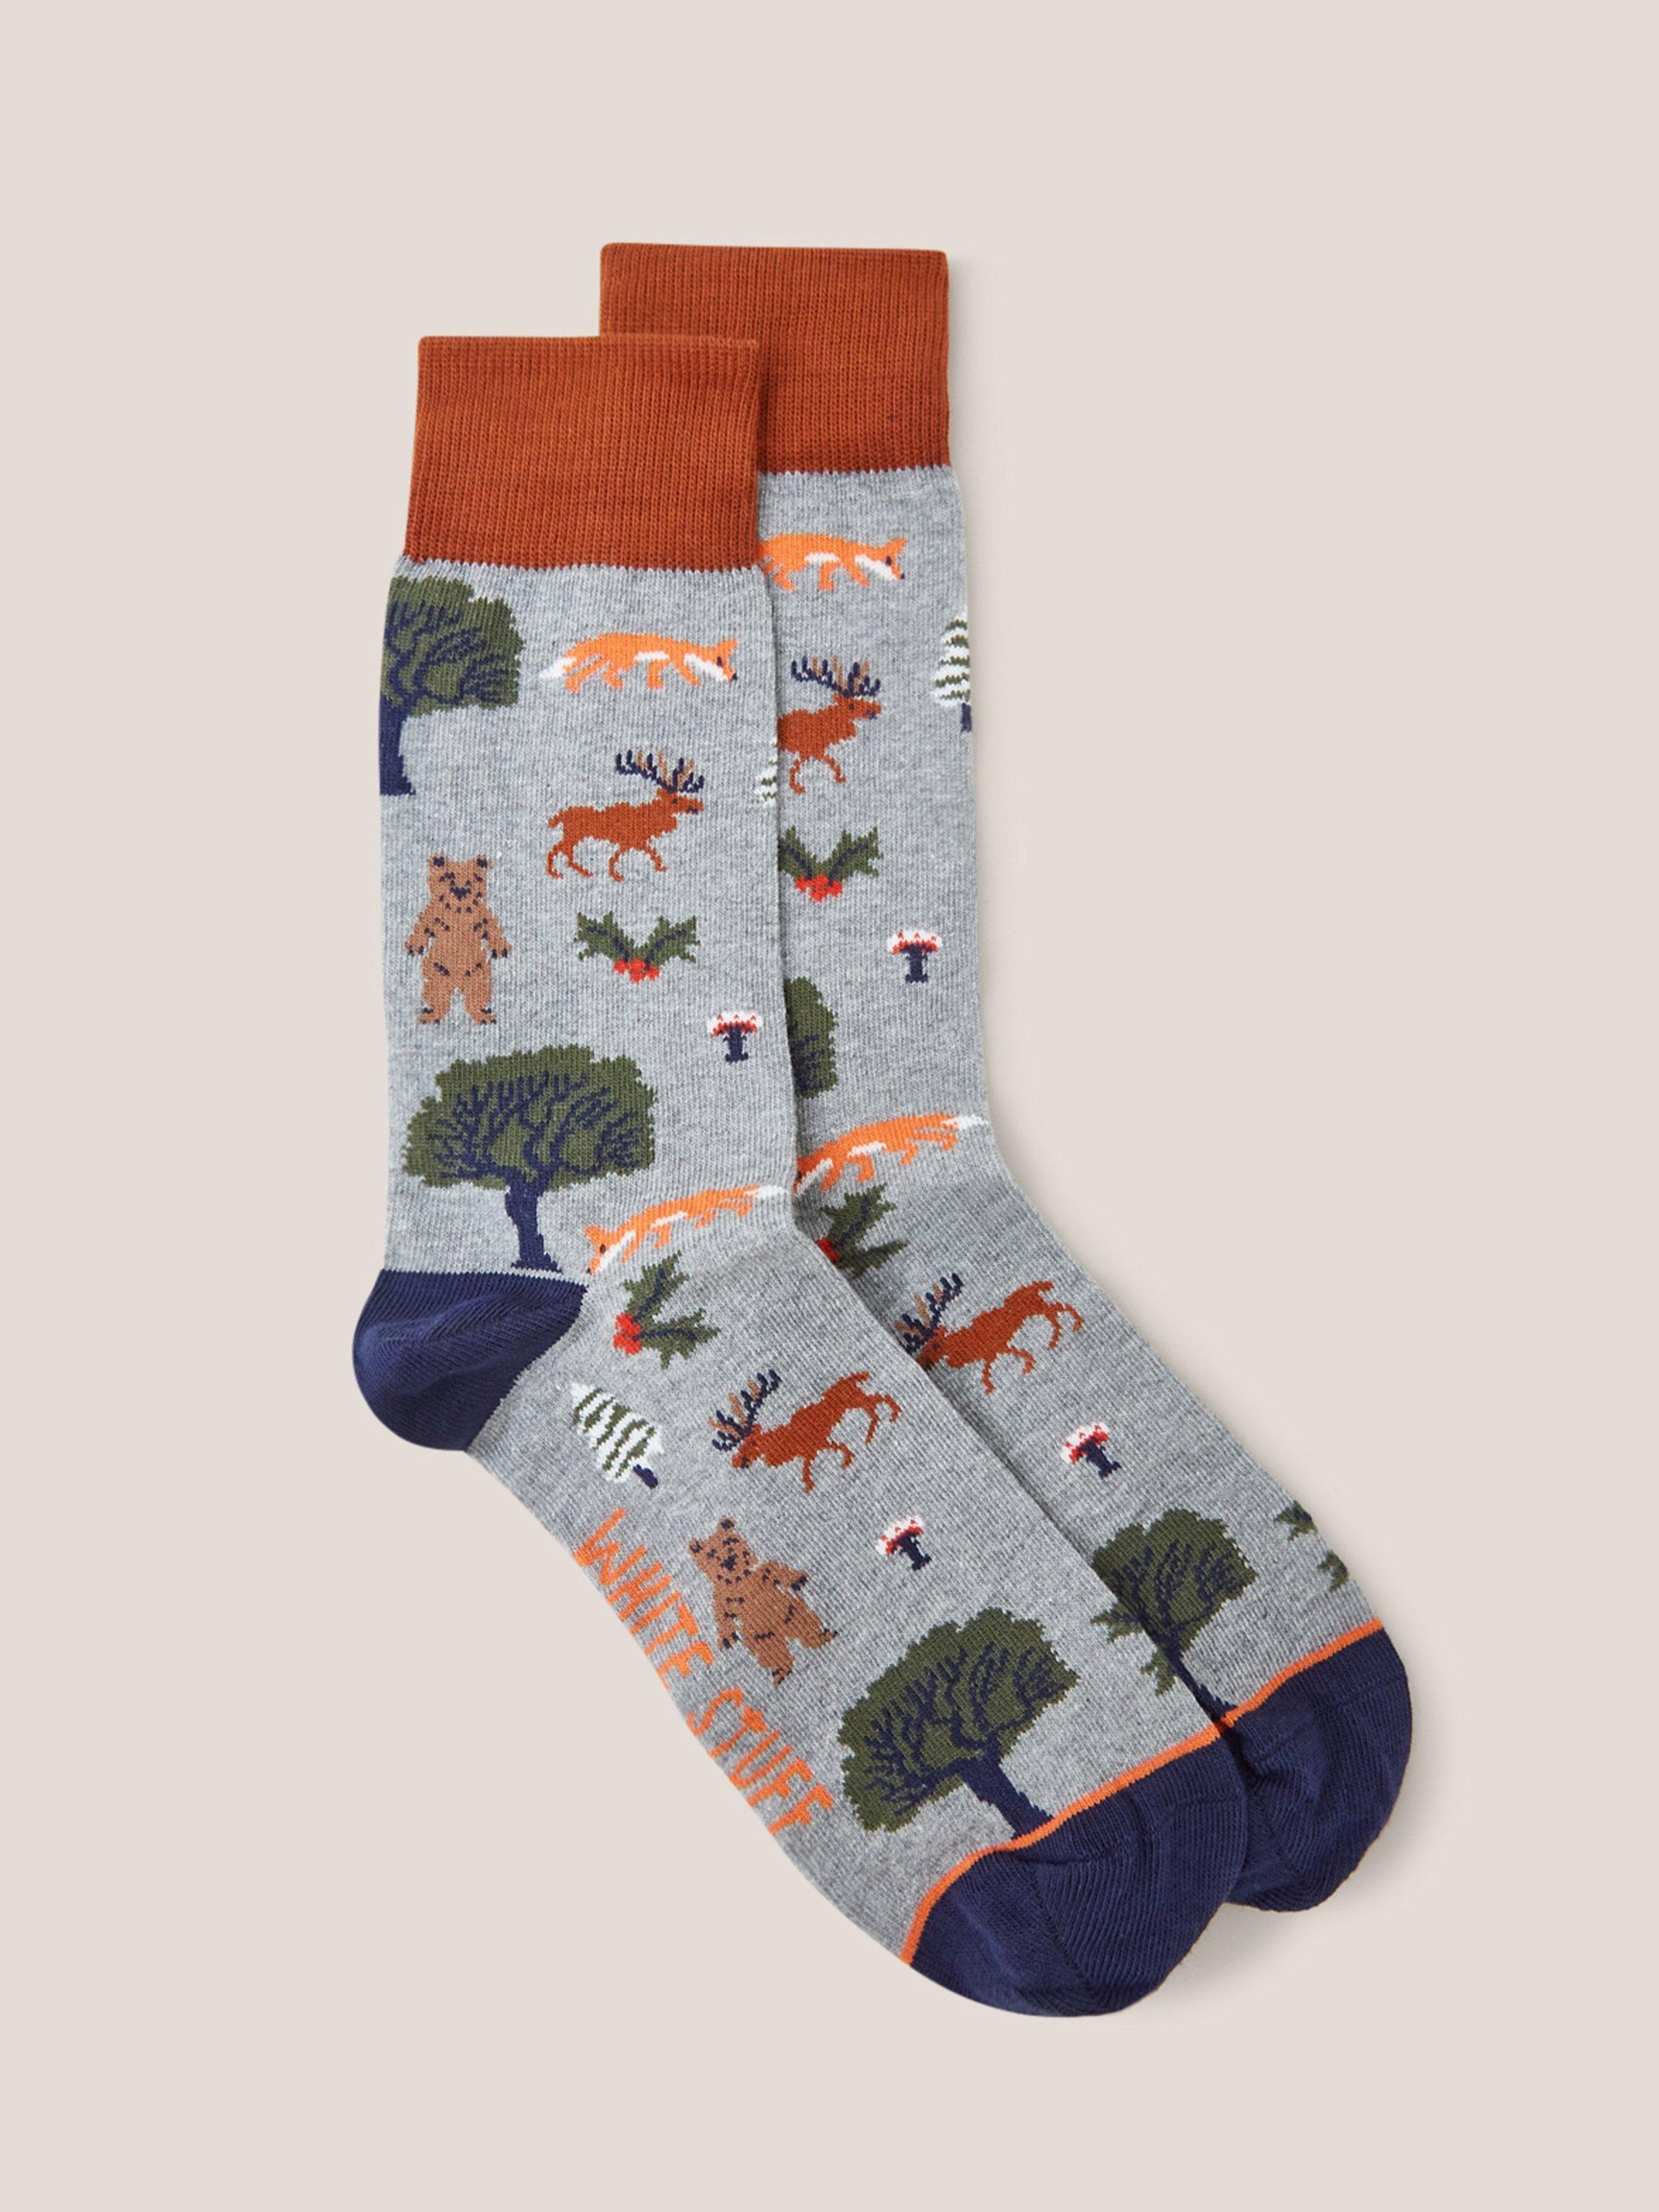 Forest Socks in a Cracker